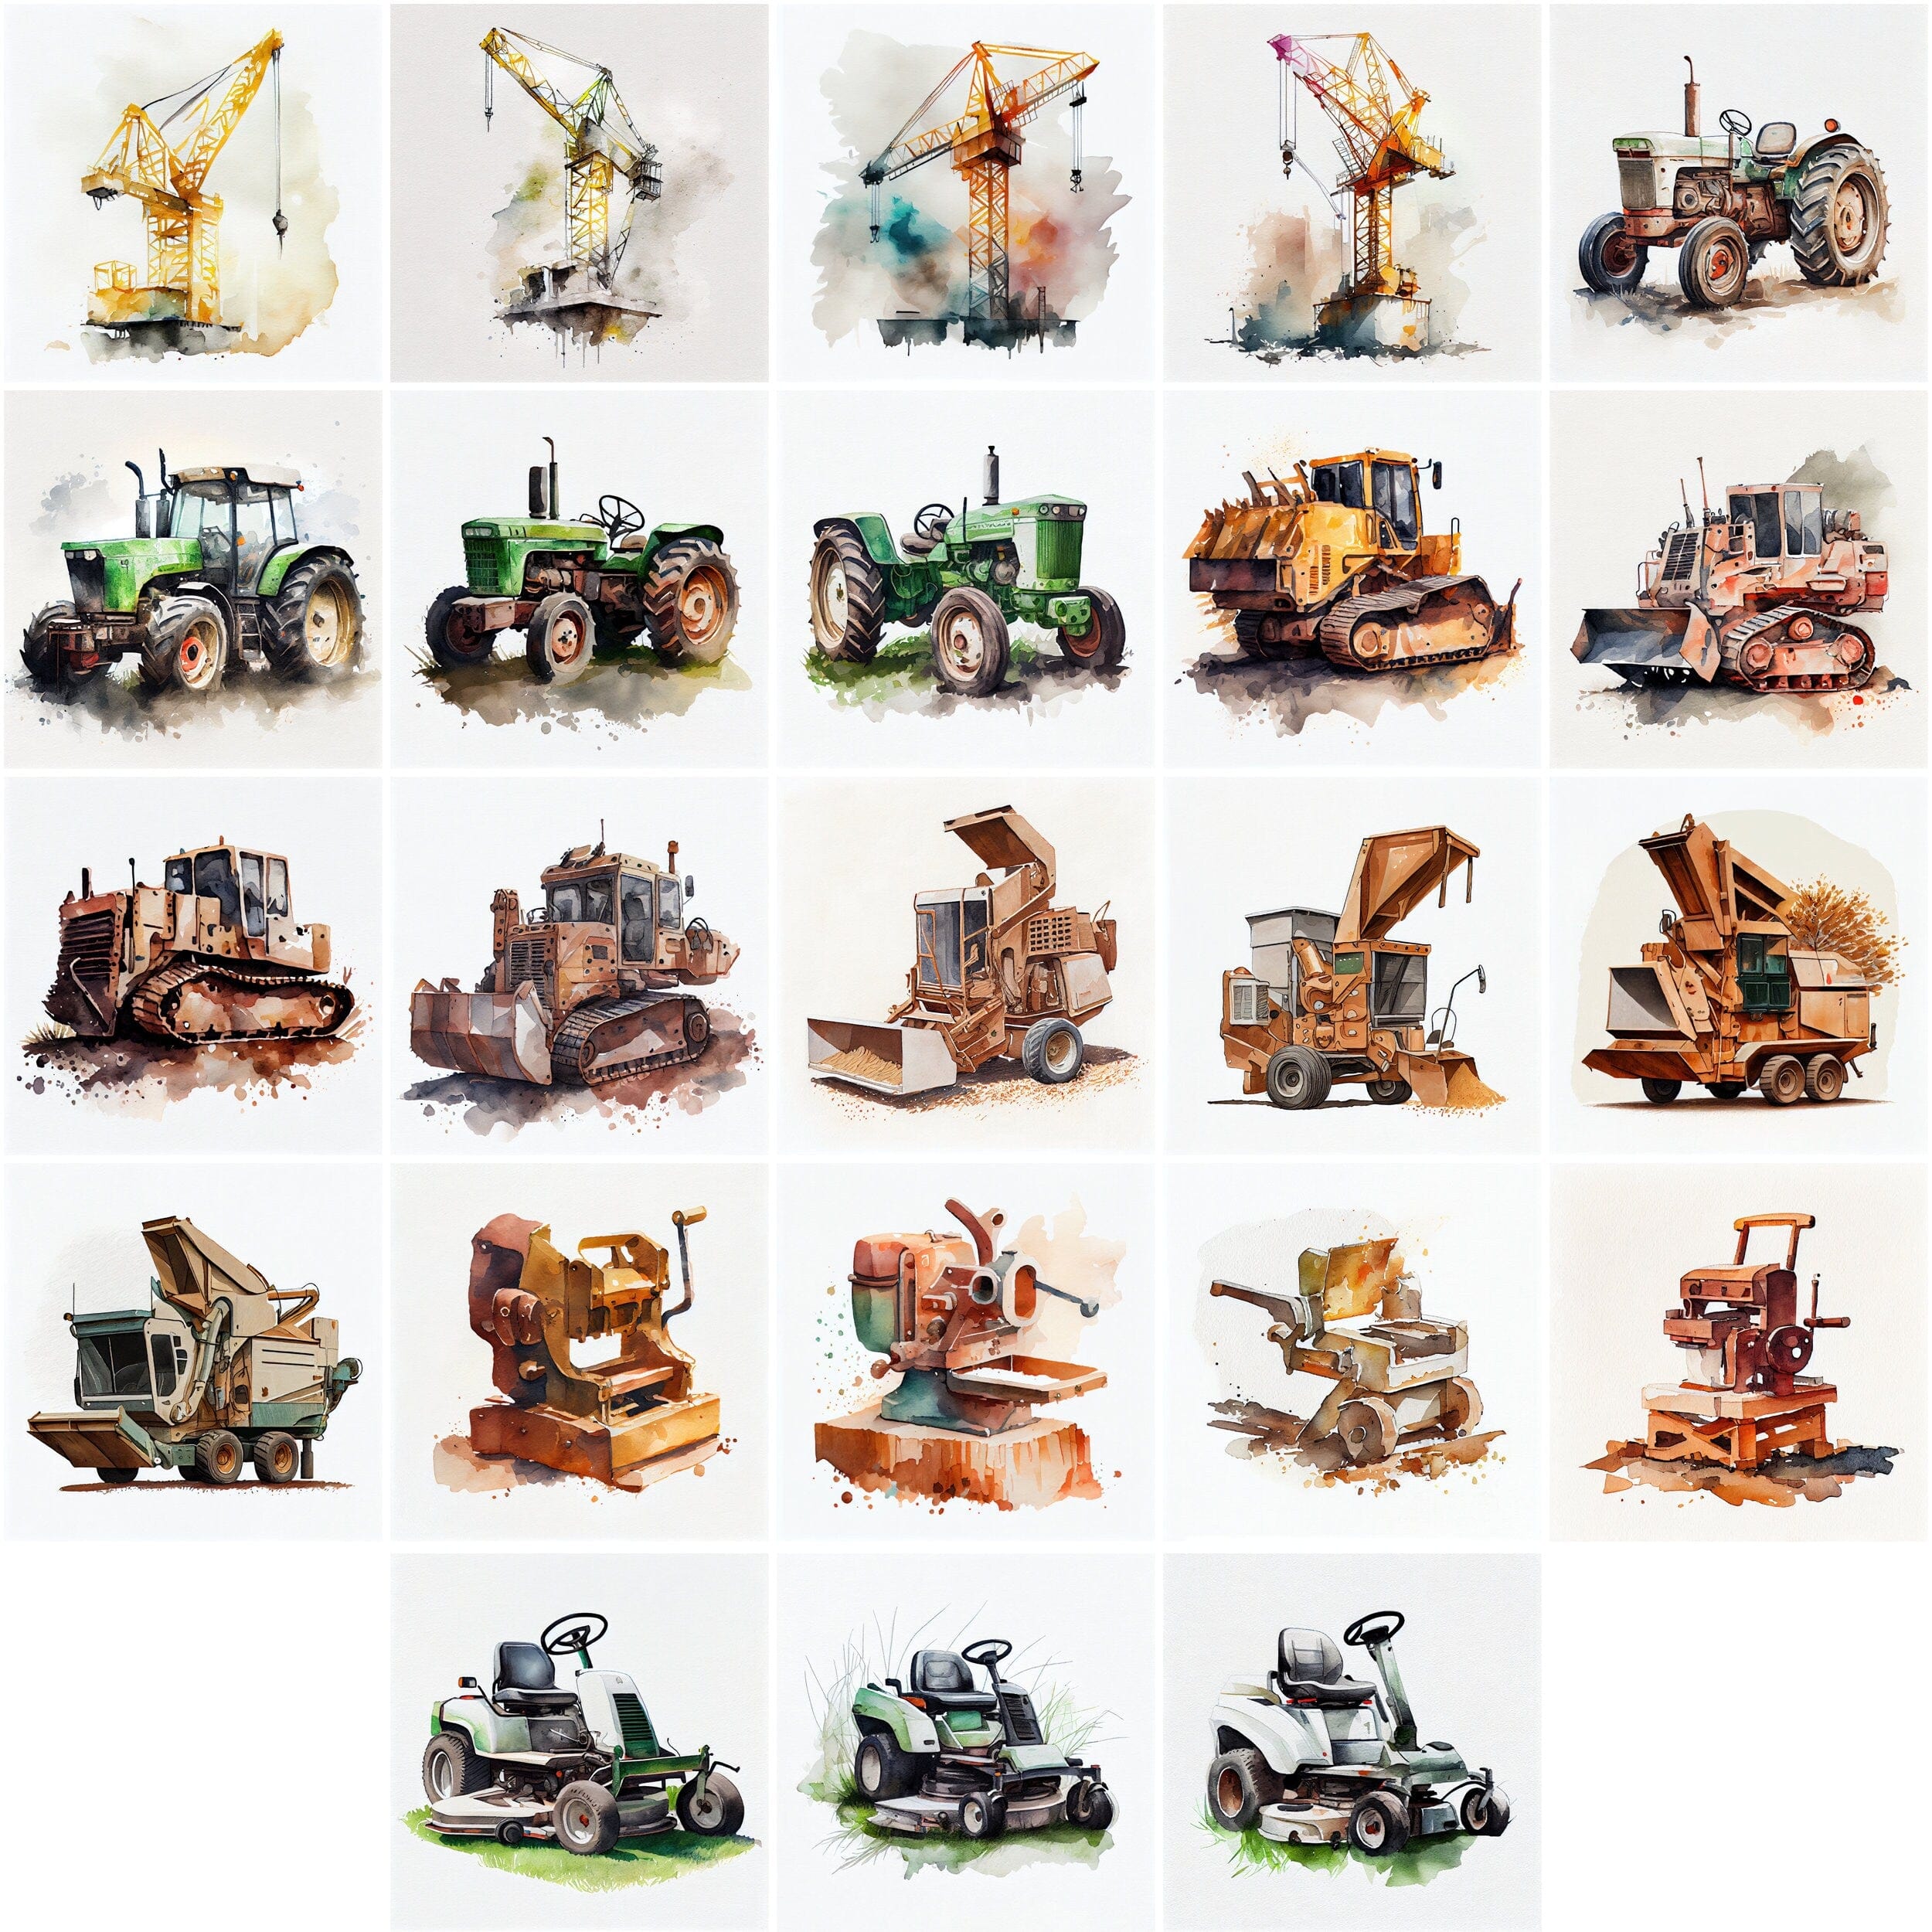 170 High-Quality Watercolor Images of Construction Tools, Equipment, and Materials for DIY Enthusiasts, and Construction Industry Experts Digital Download Sumobundle